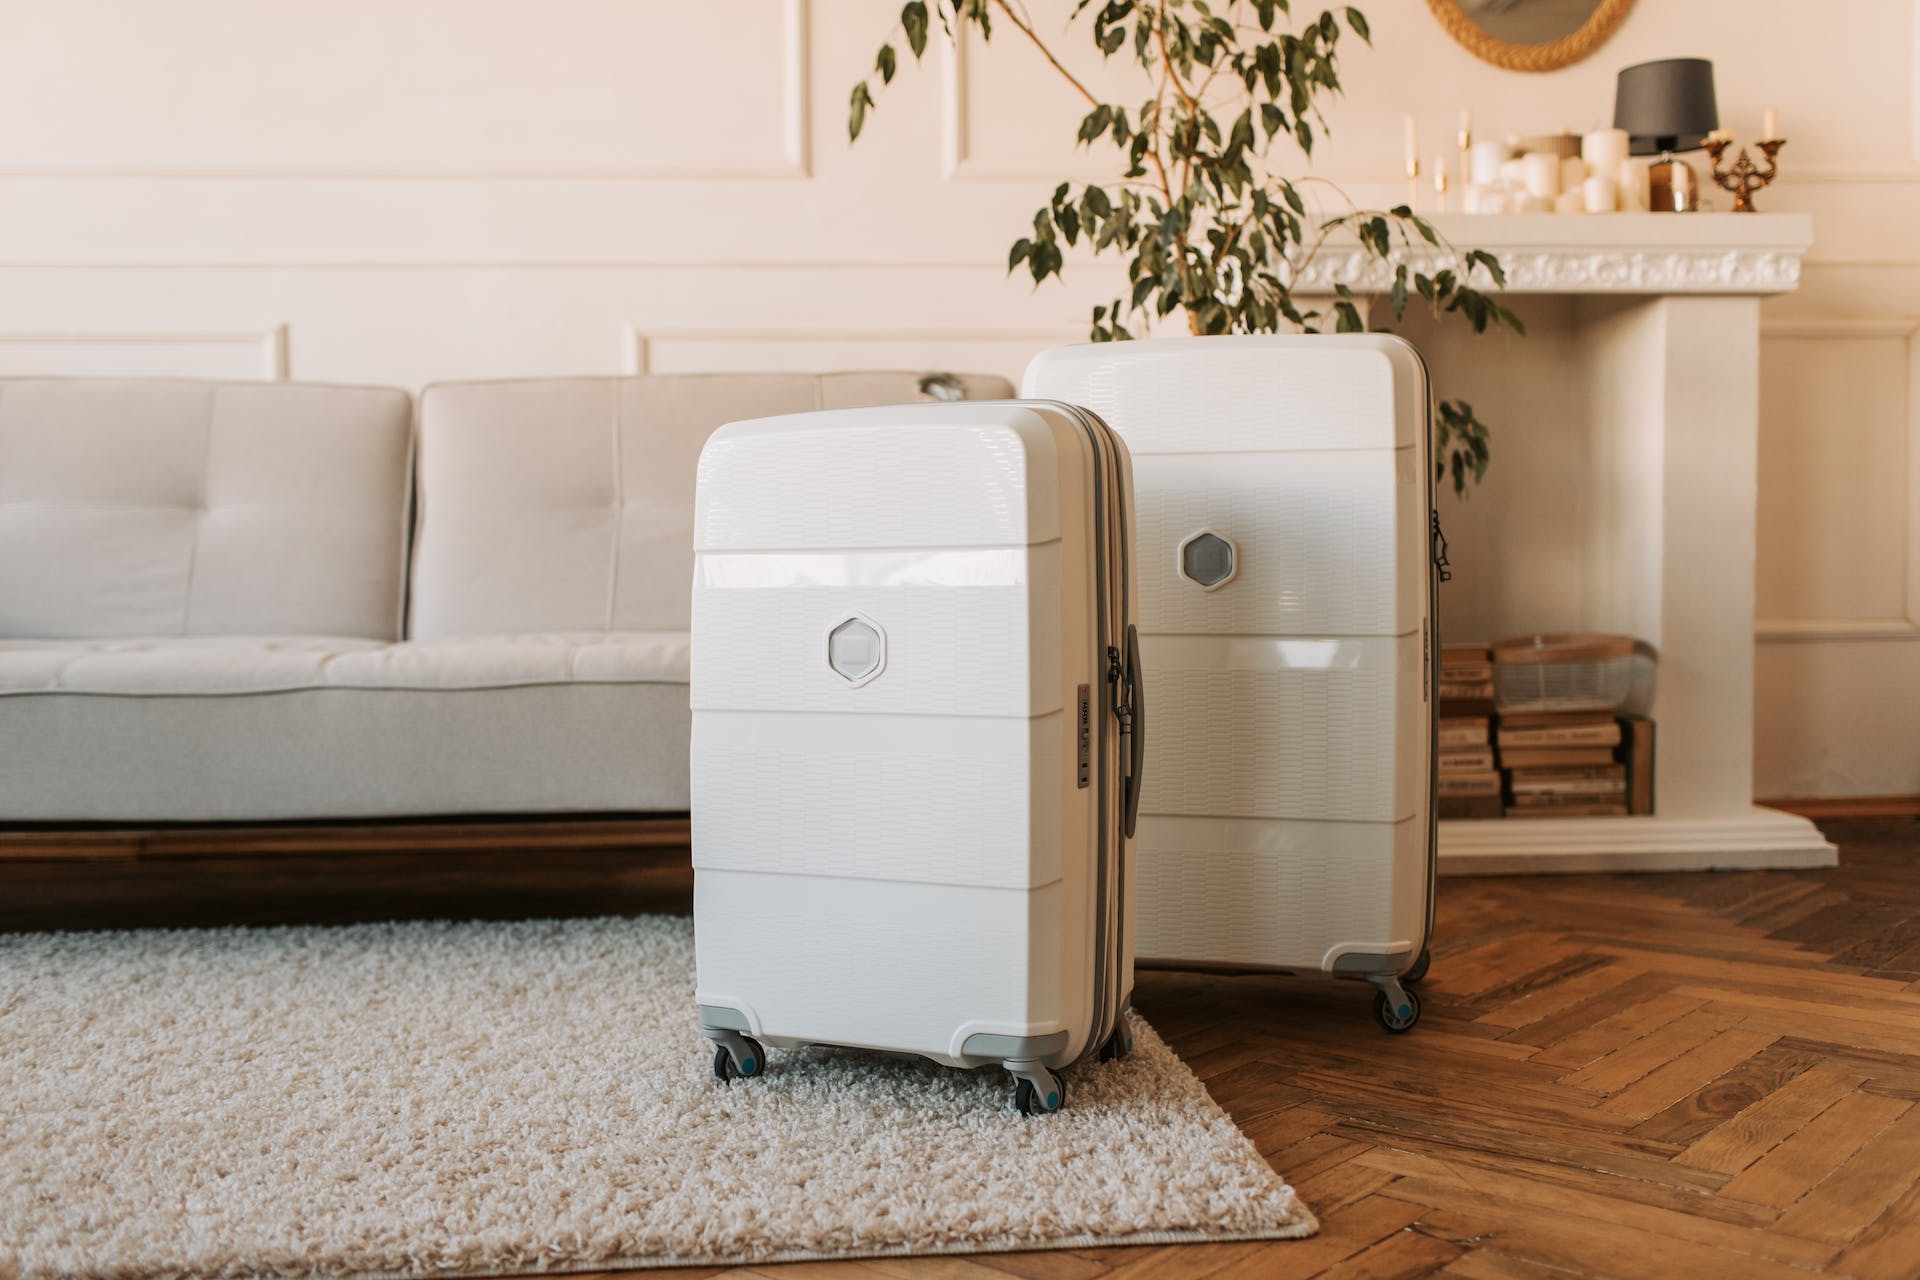 Two white suitcases | Source: Pexels